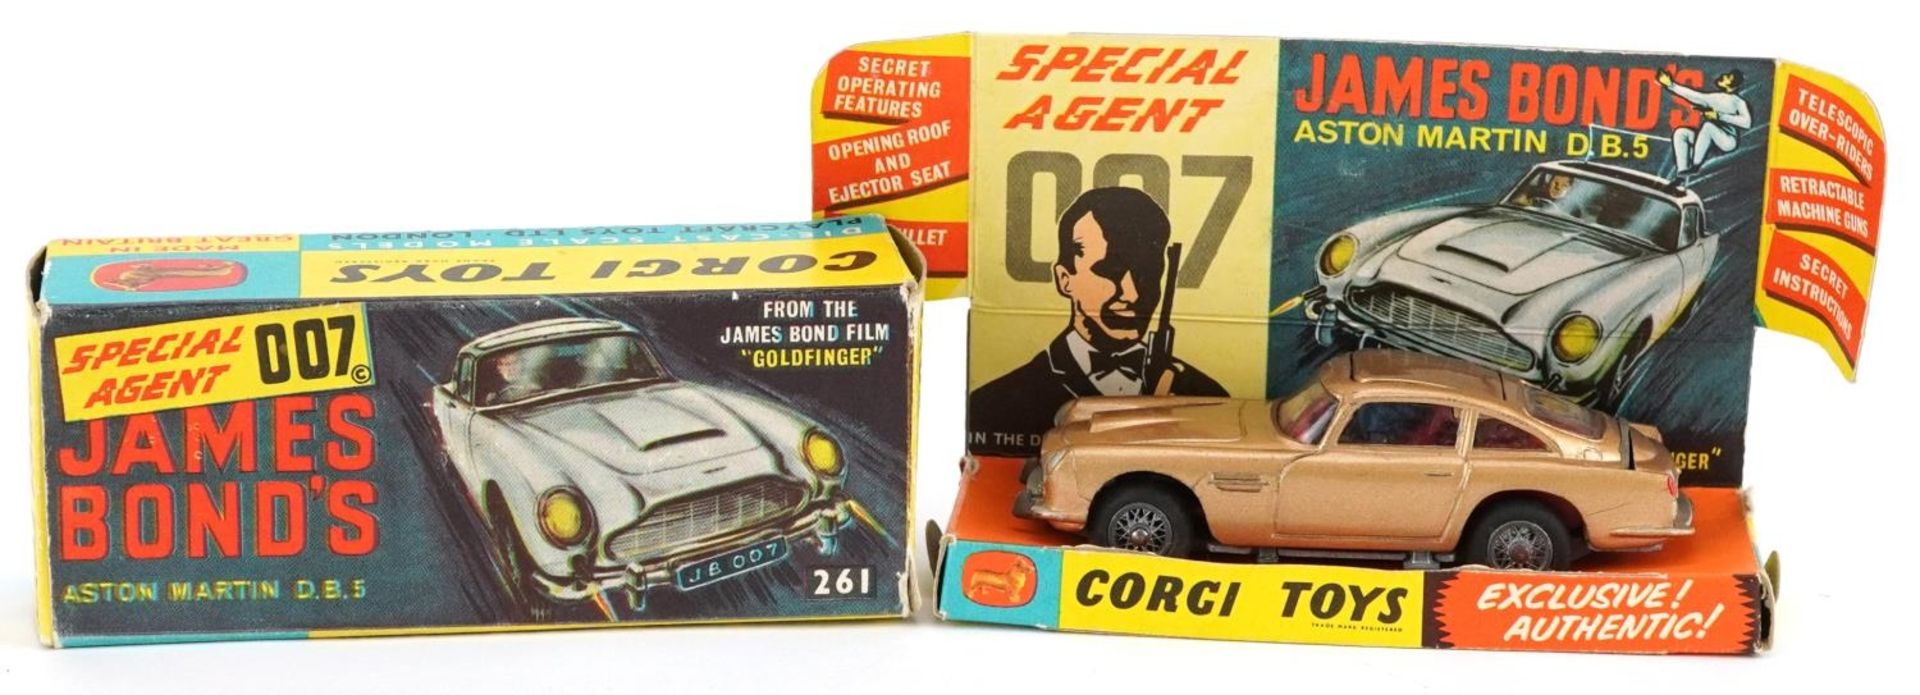 Vintage Corgi Toys diecast Special Agent James Bond's Aston Martin DB5 with box numbered 261